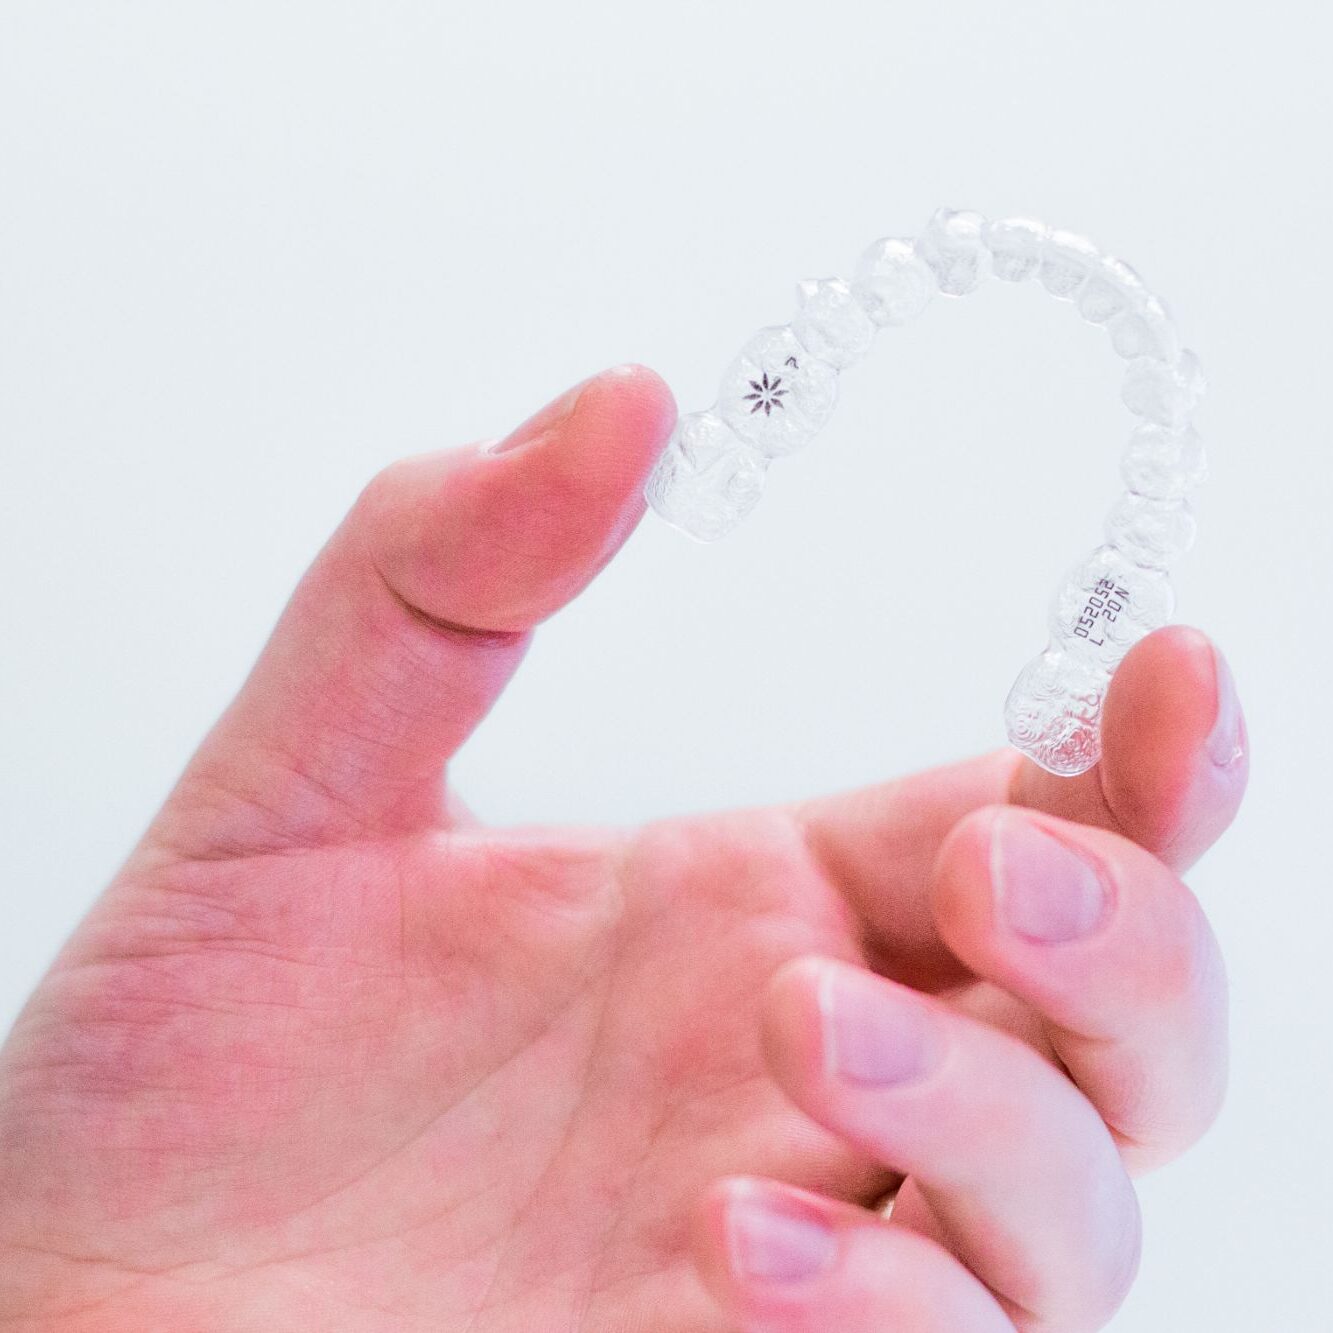 montgomery clear aligners